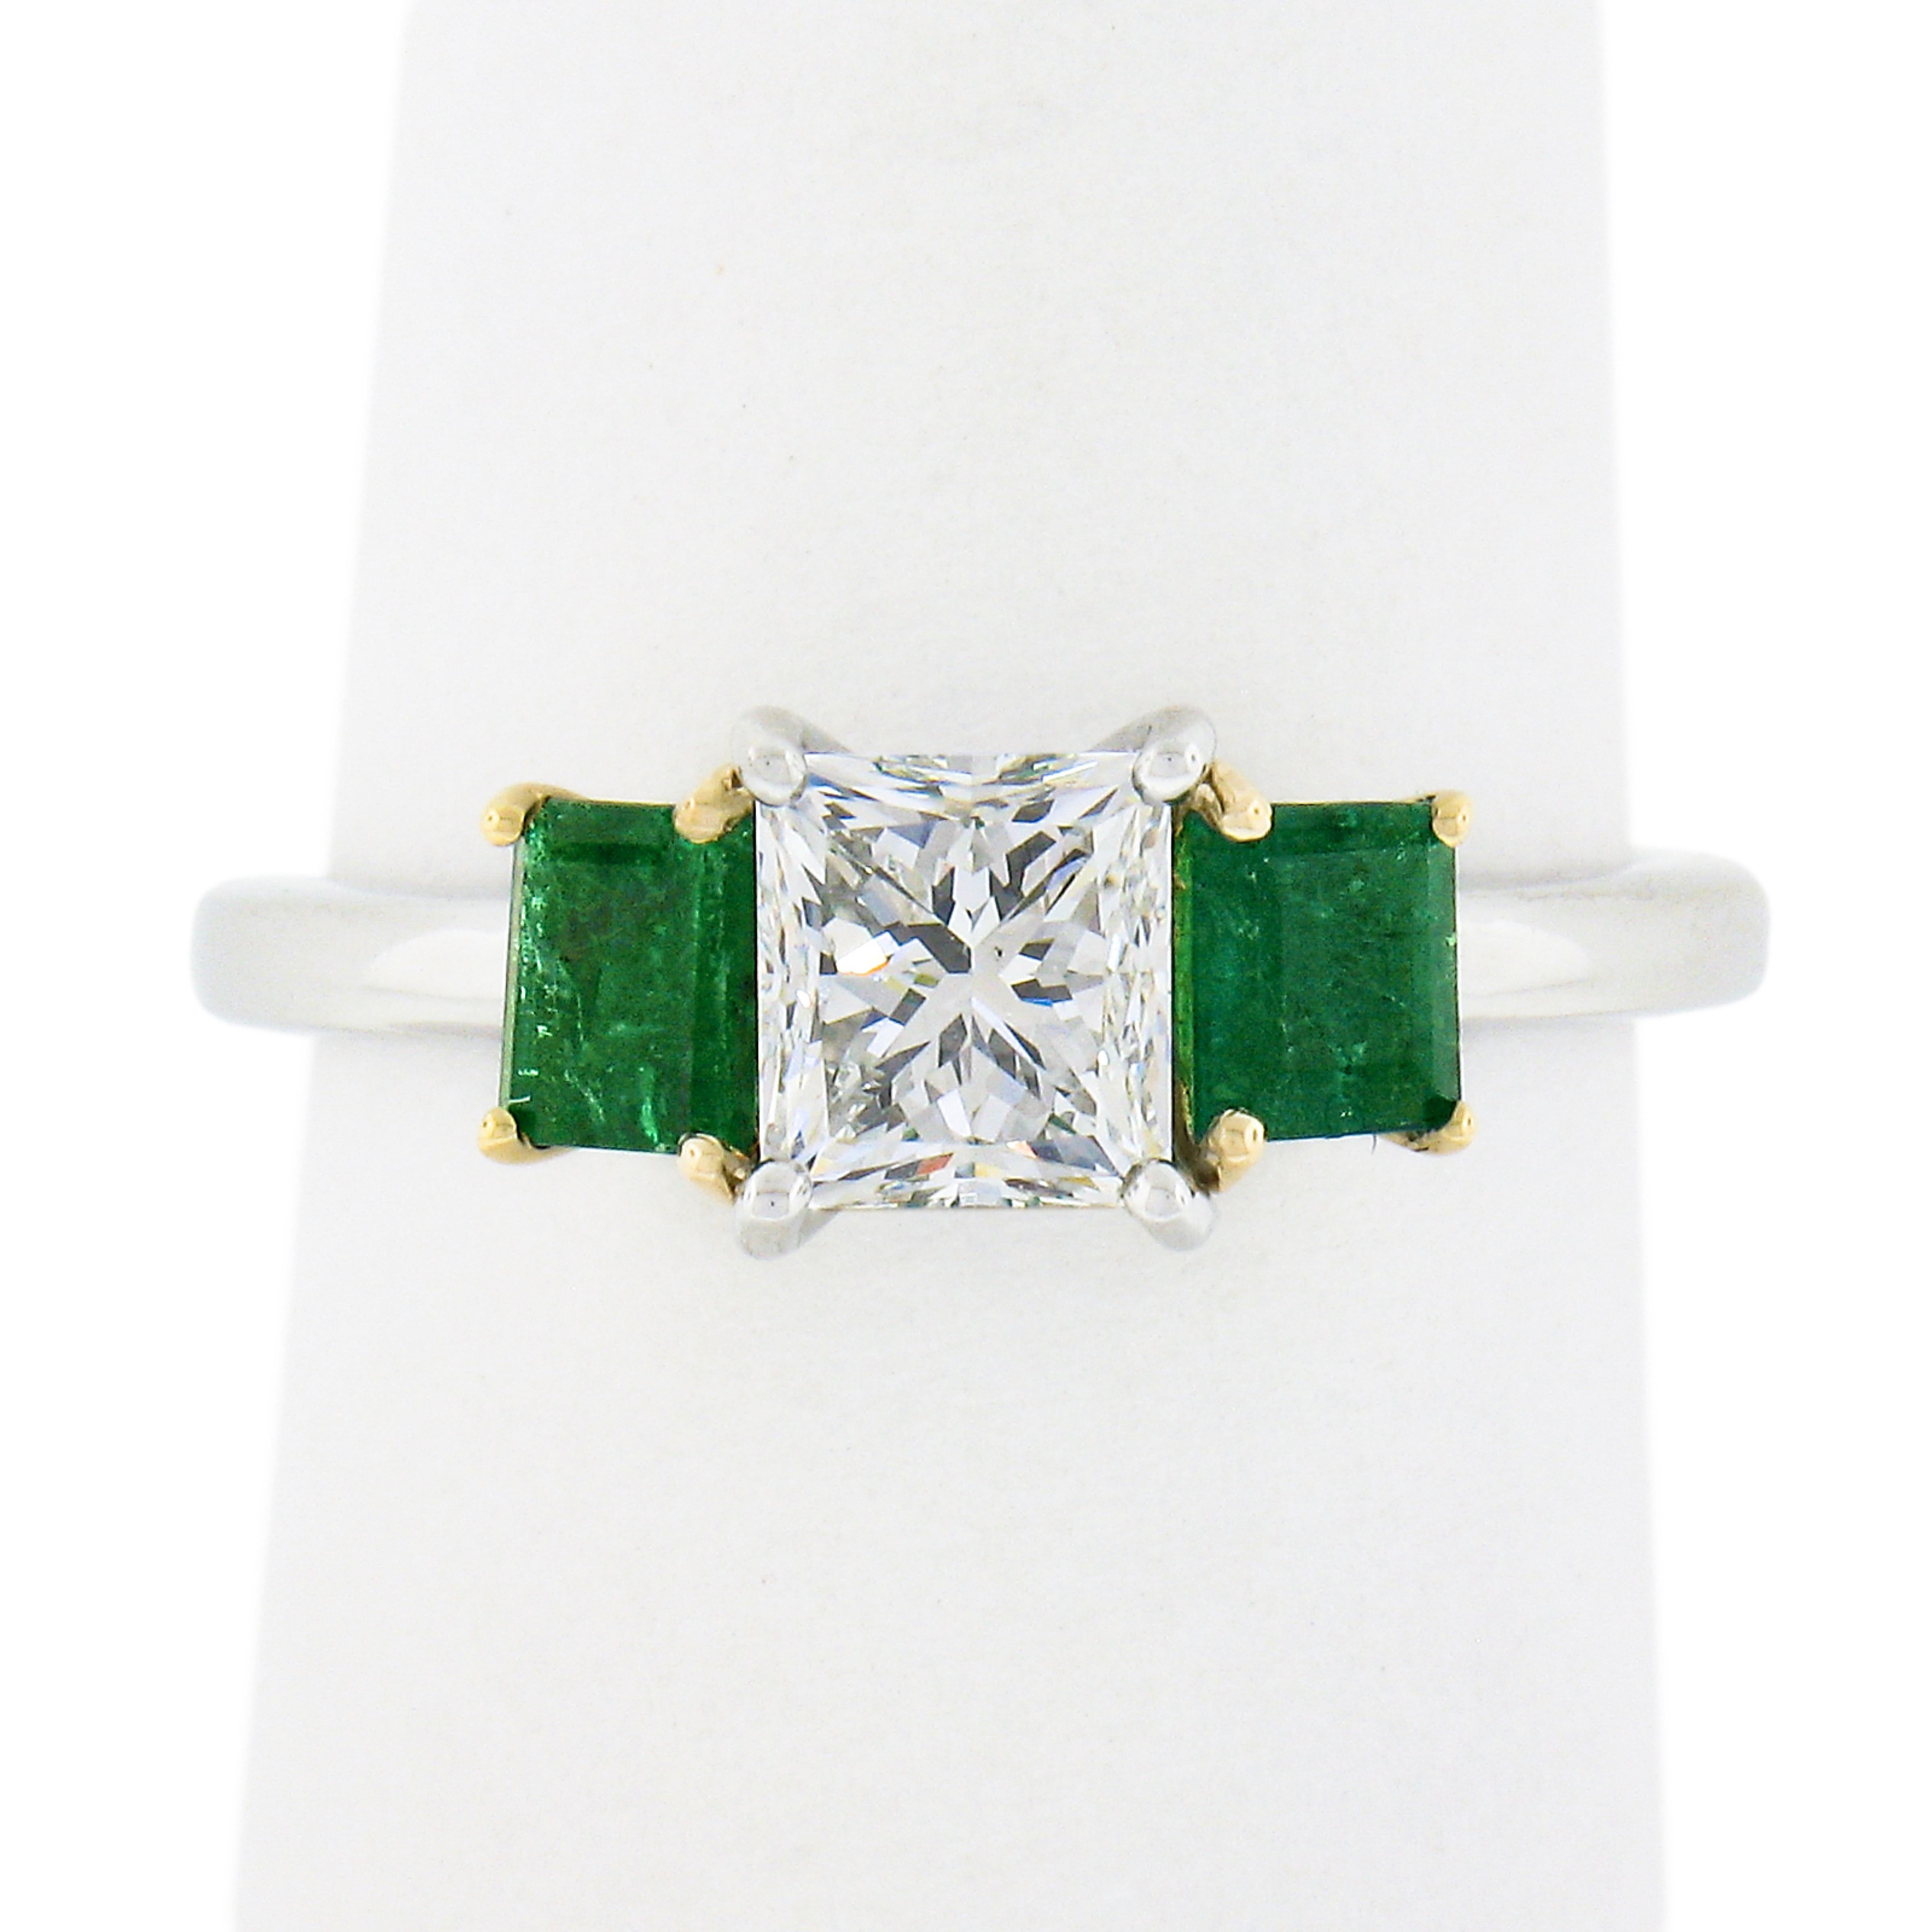 This elegant, brand new and custom designed diamond and emerald three stone engagement ring is crafted in solid platinum and 18k yellow gold. It features a truly gorgeous, GIA certified, princess cut diamond solitaire prong set at the center and is